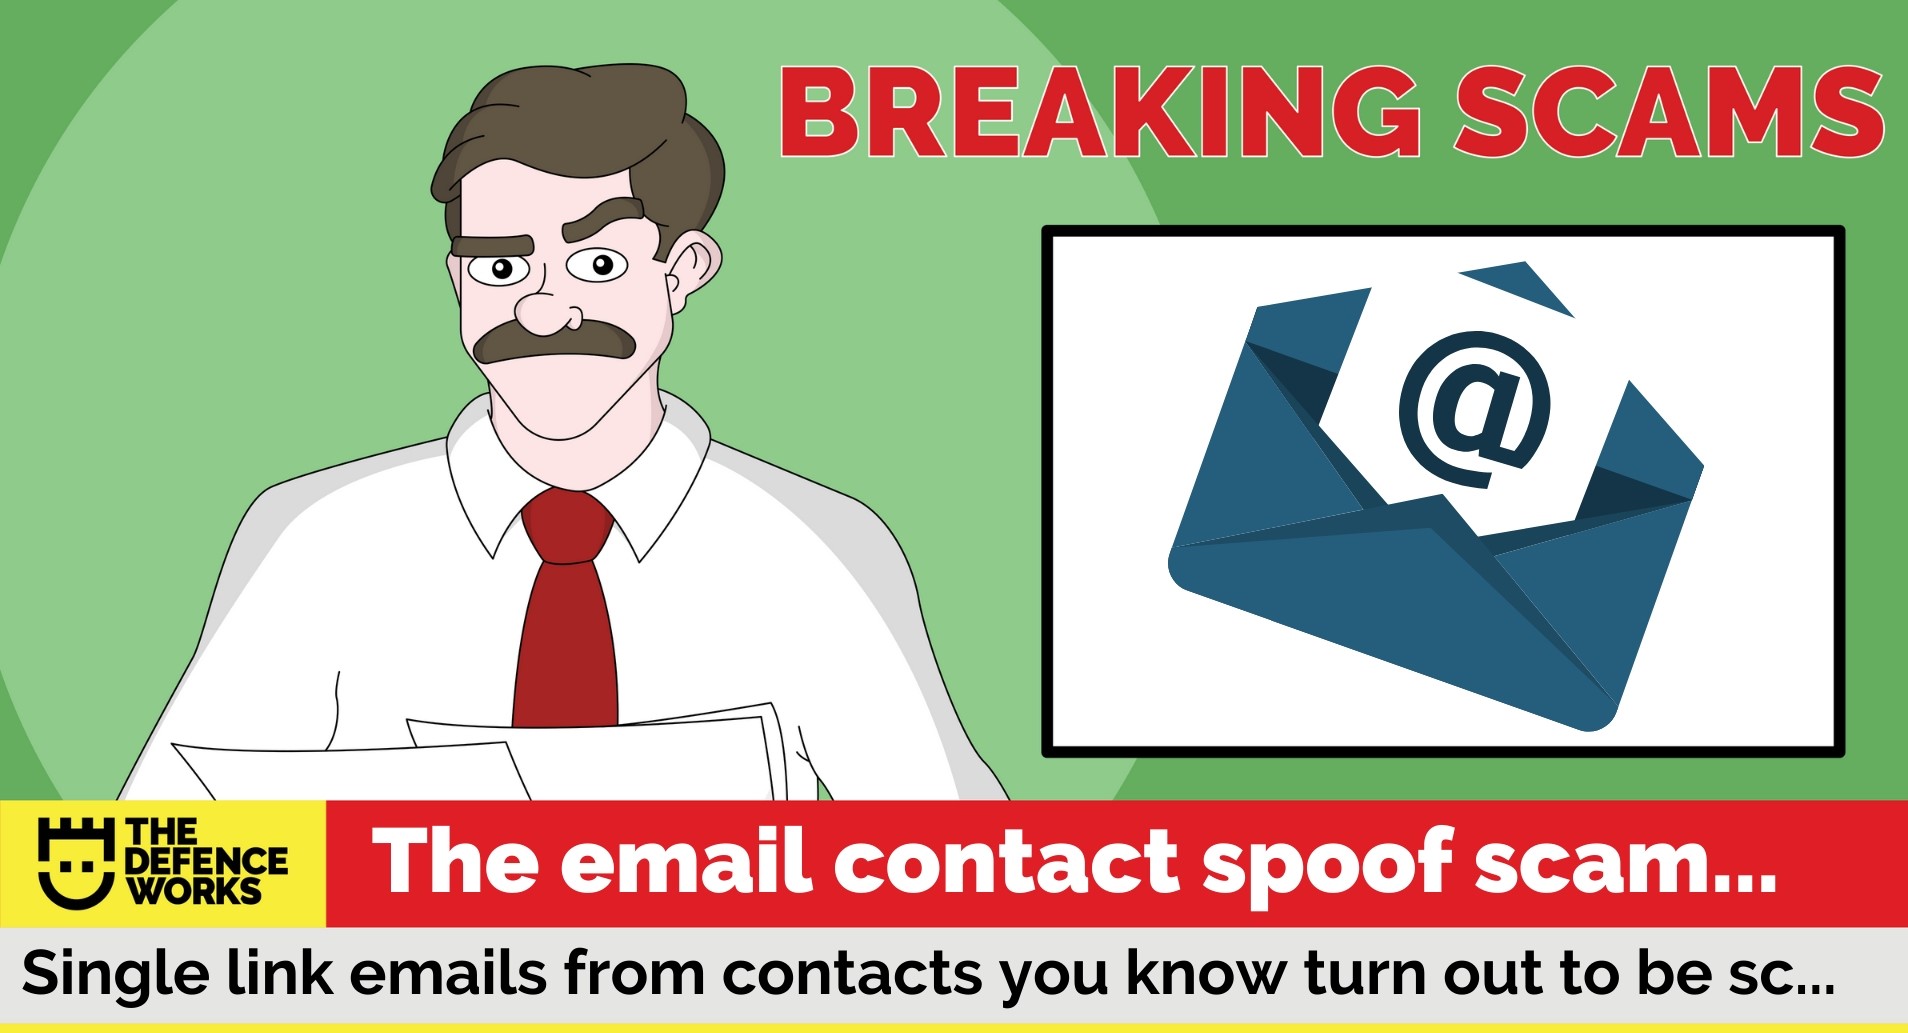 When is a Spoof not a Spoof? The Email Contact Scam